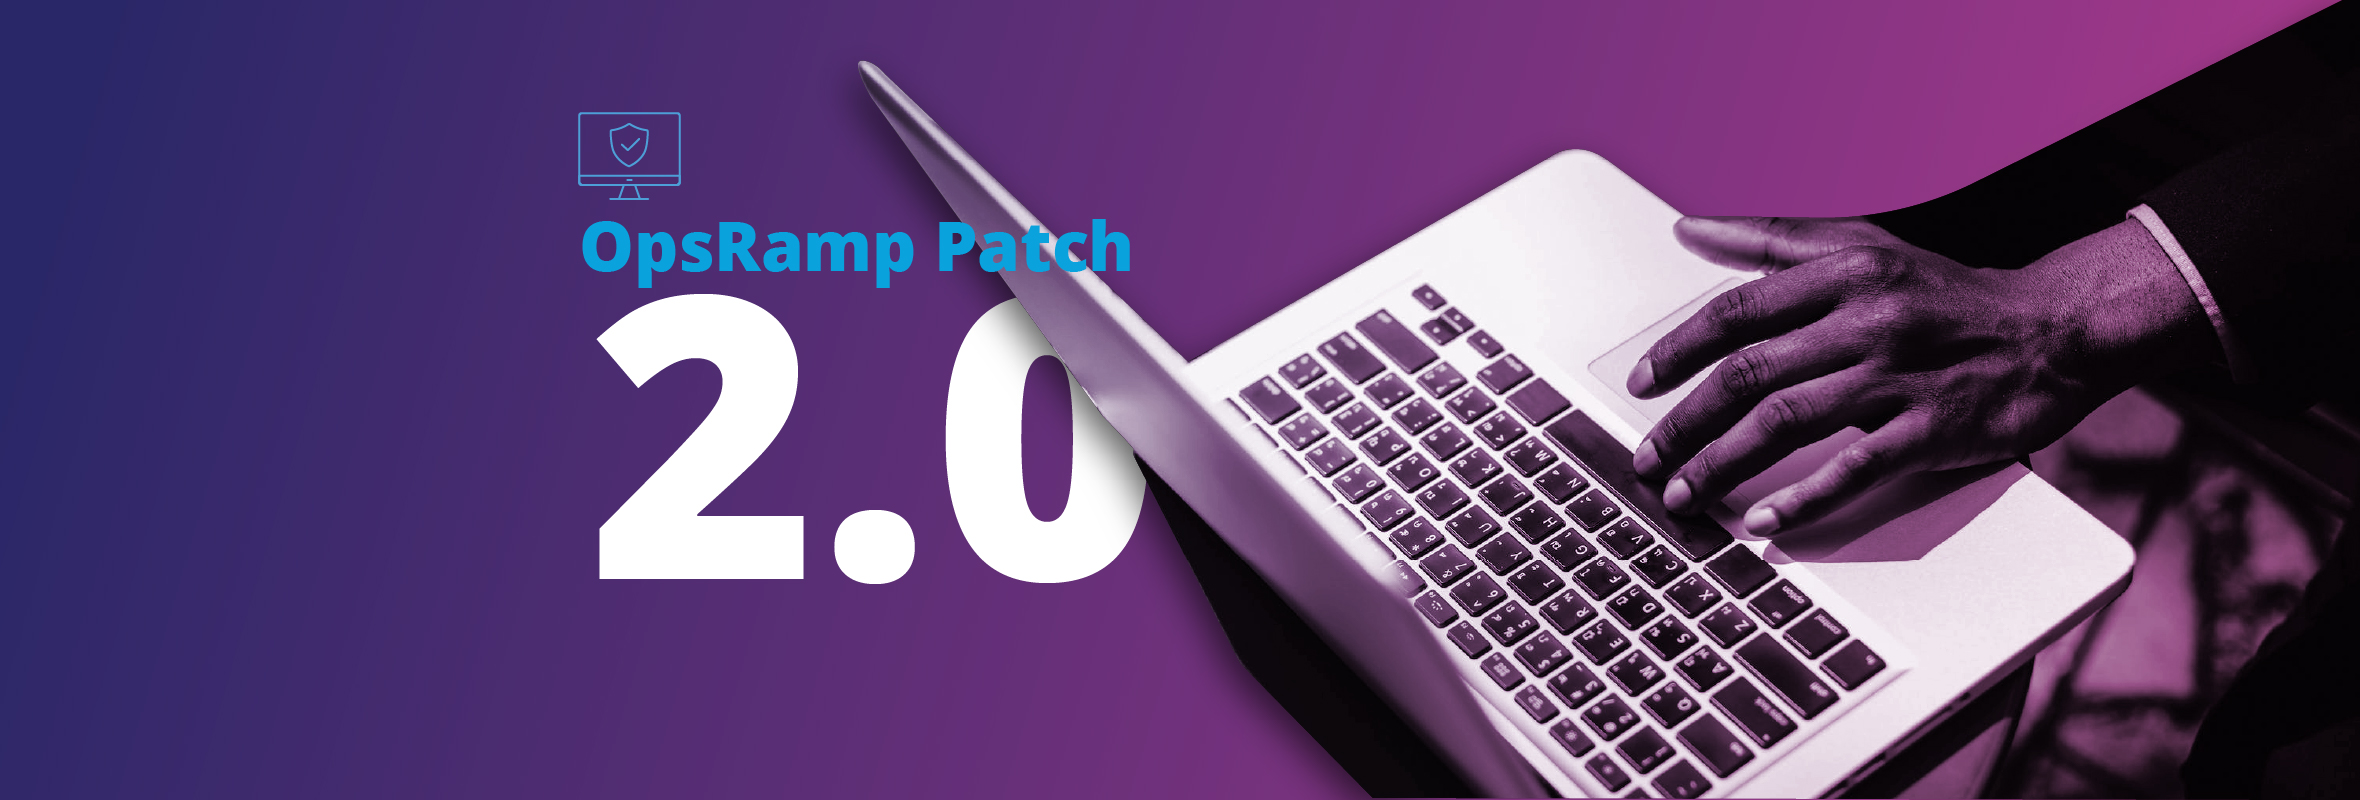 OpsRamp Patch 2.0 - Solving Your OS Patching Challenges